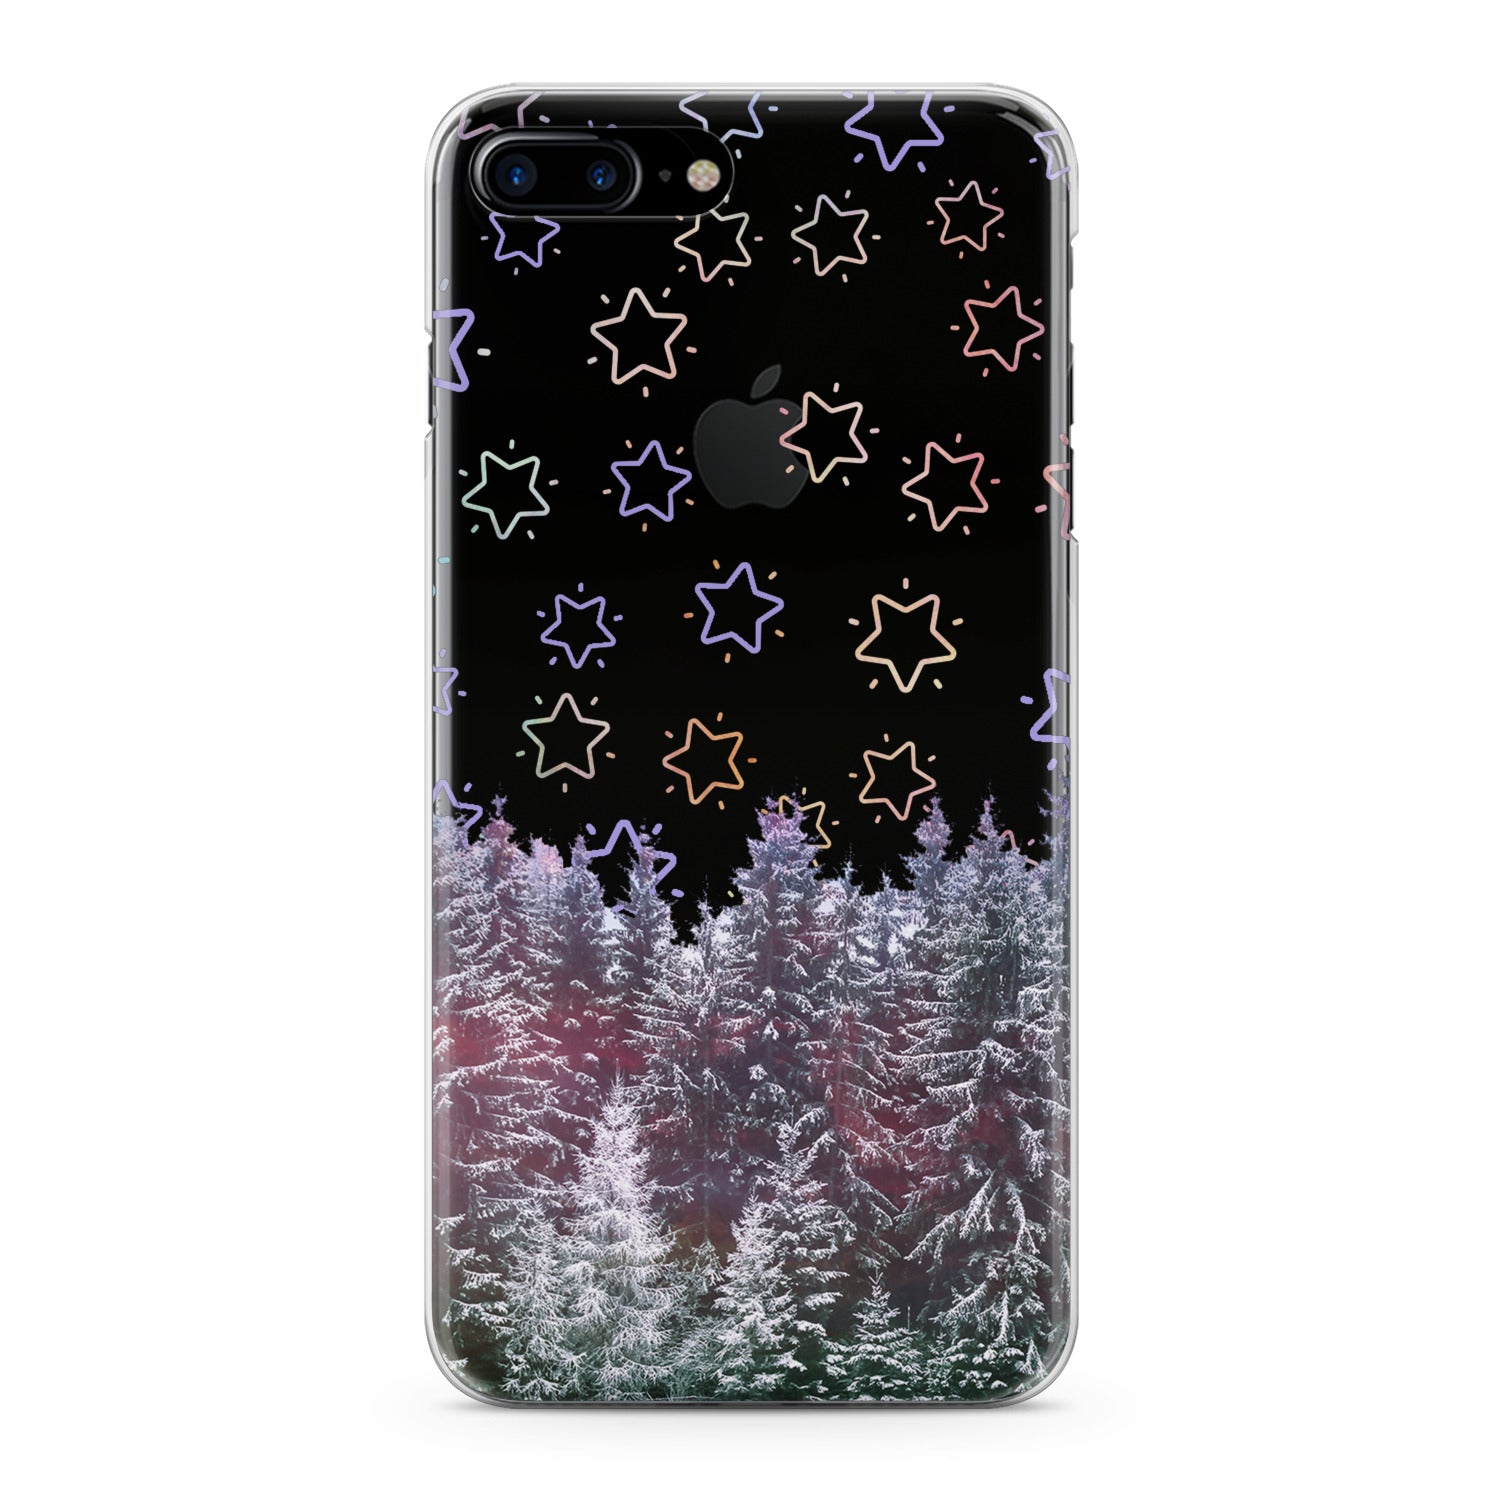 Lex Altern Cute Forest Phone Case for your iPhone & Android phone.